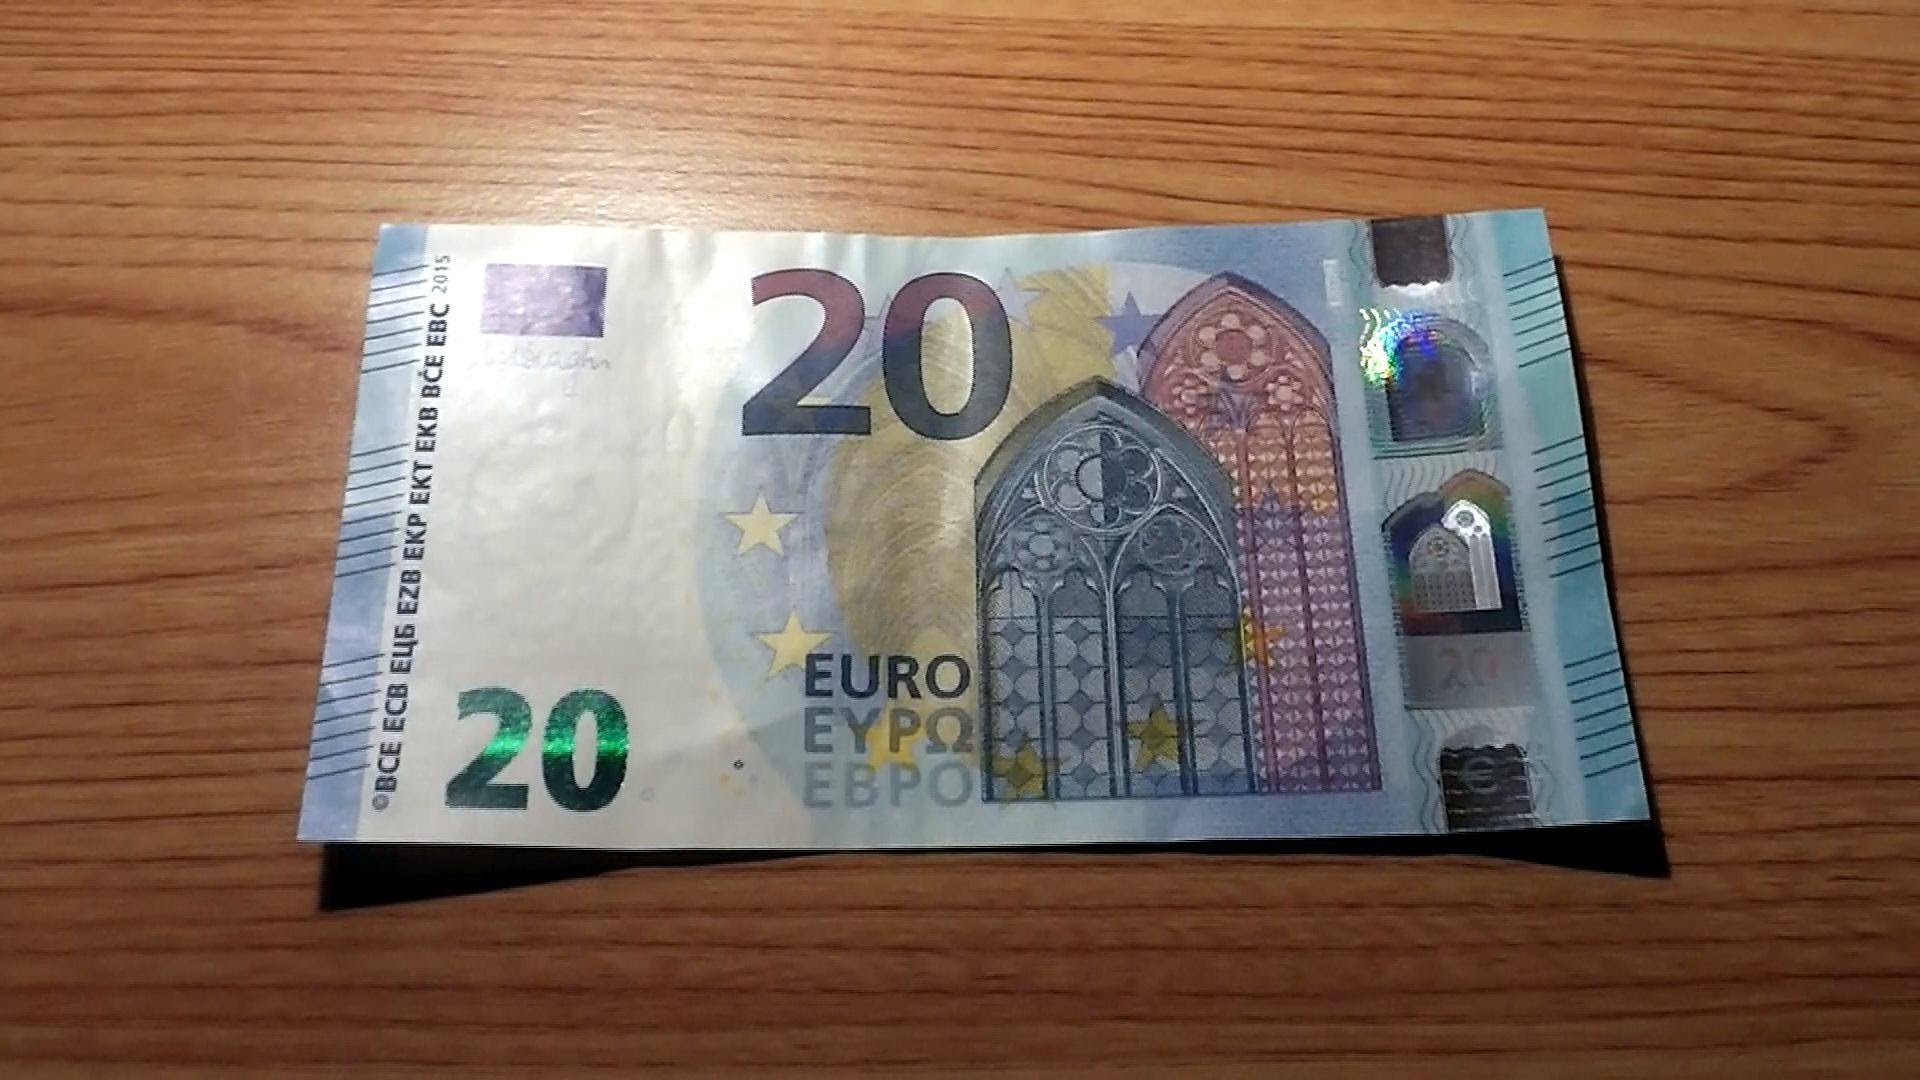 The new 20 Euro note - Die neue 20 Euro Banknote - YouTube